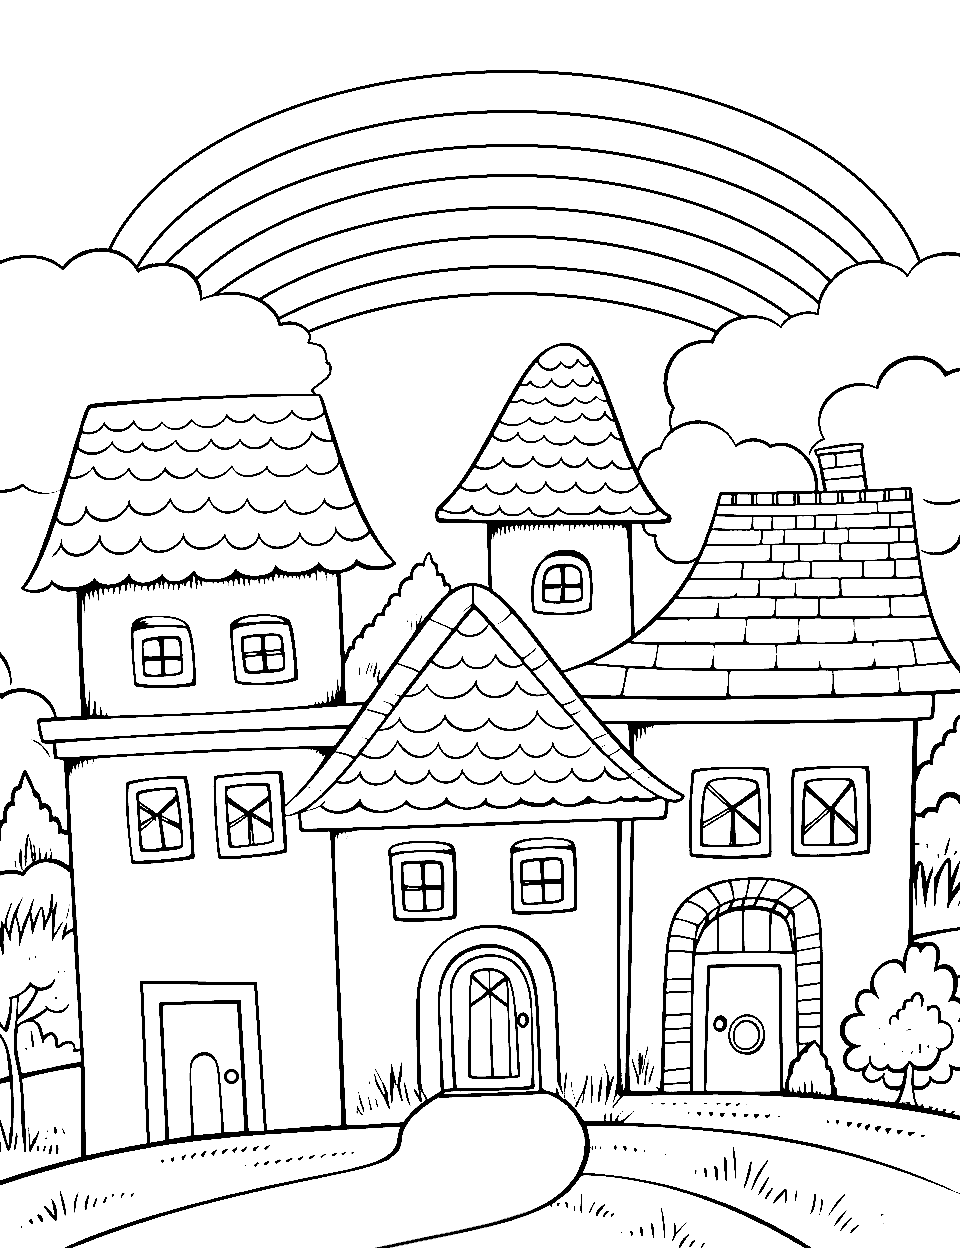 Rainbow Over Town Coloring Page - A village of houses under a magnificent rainbow.